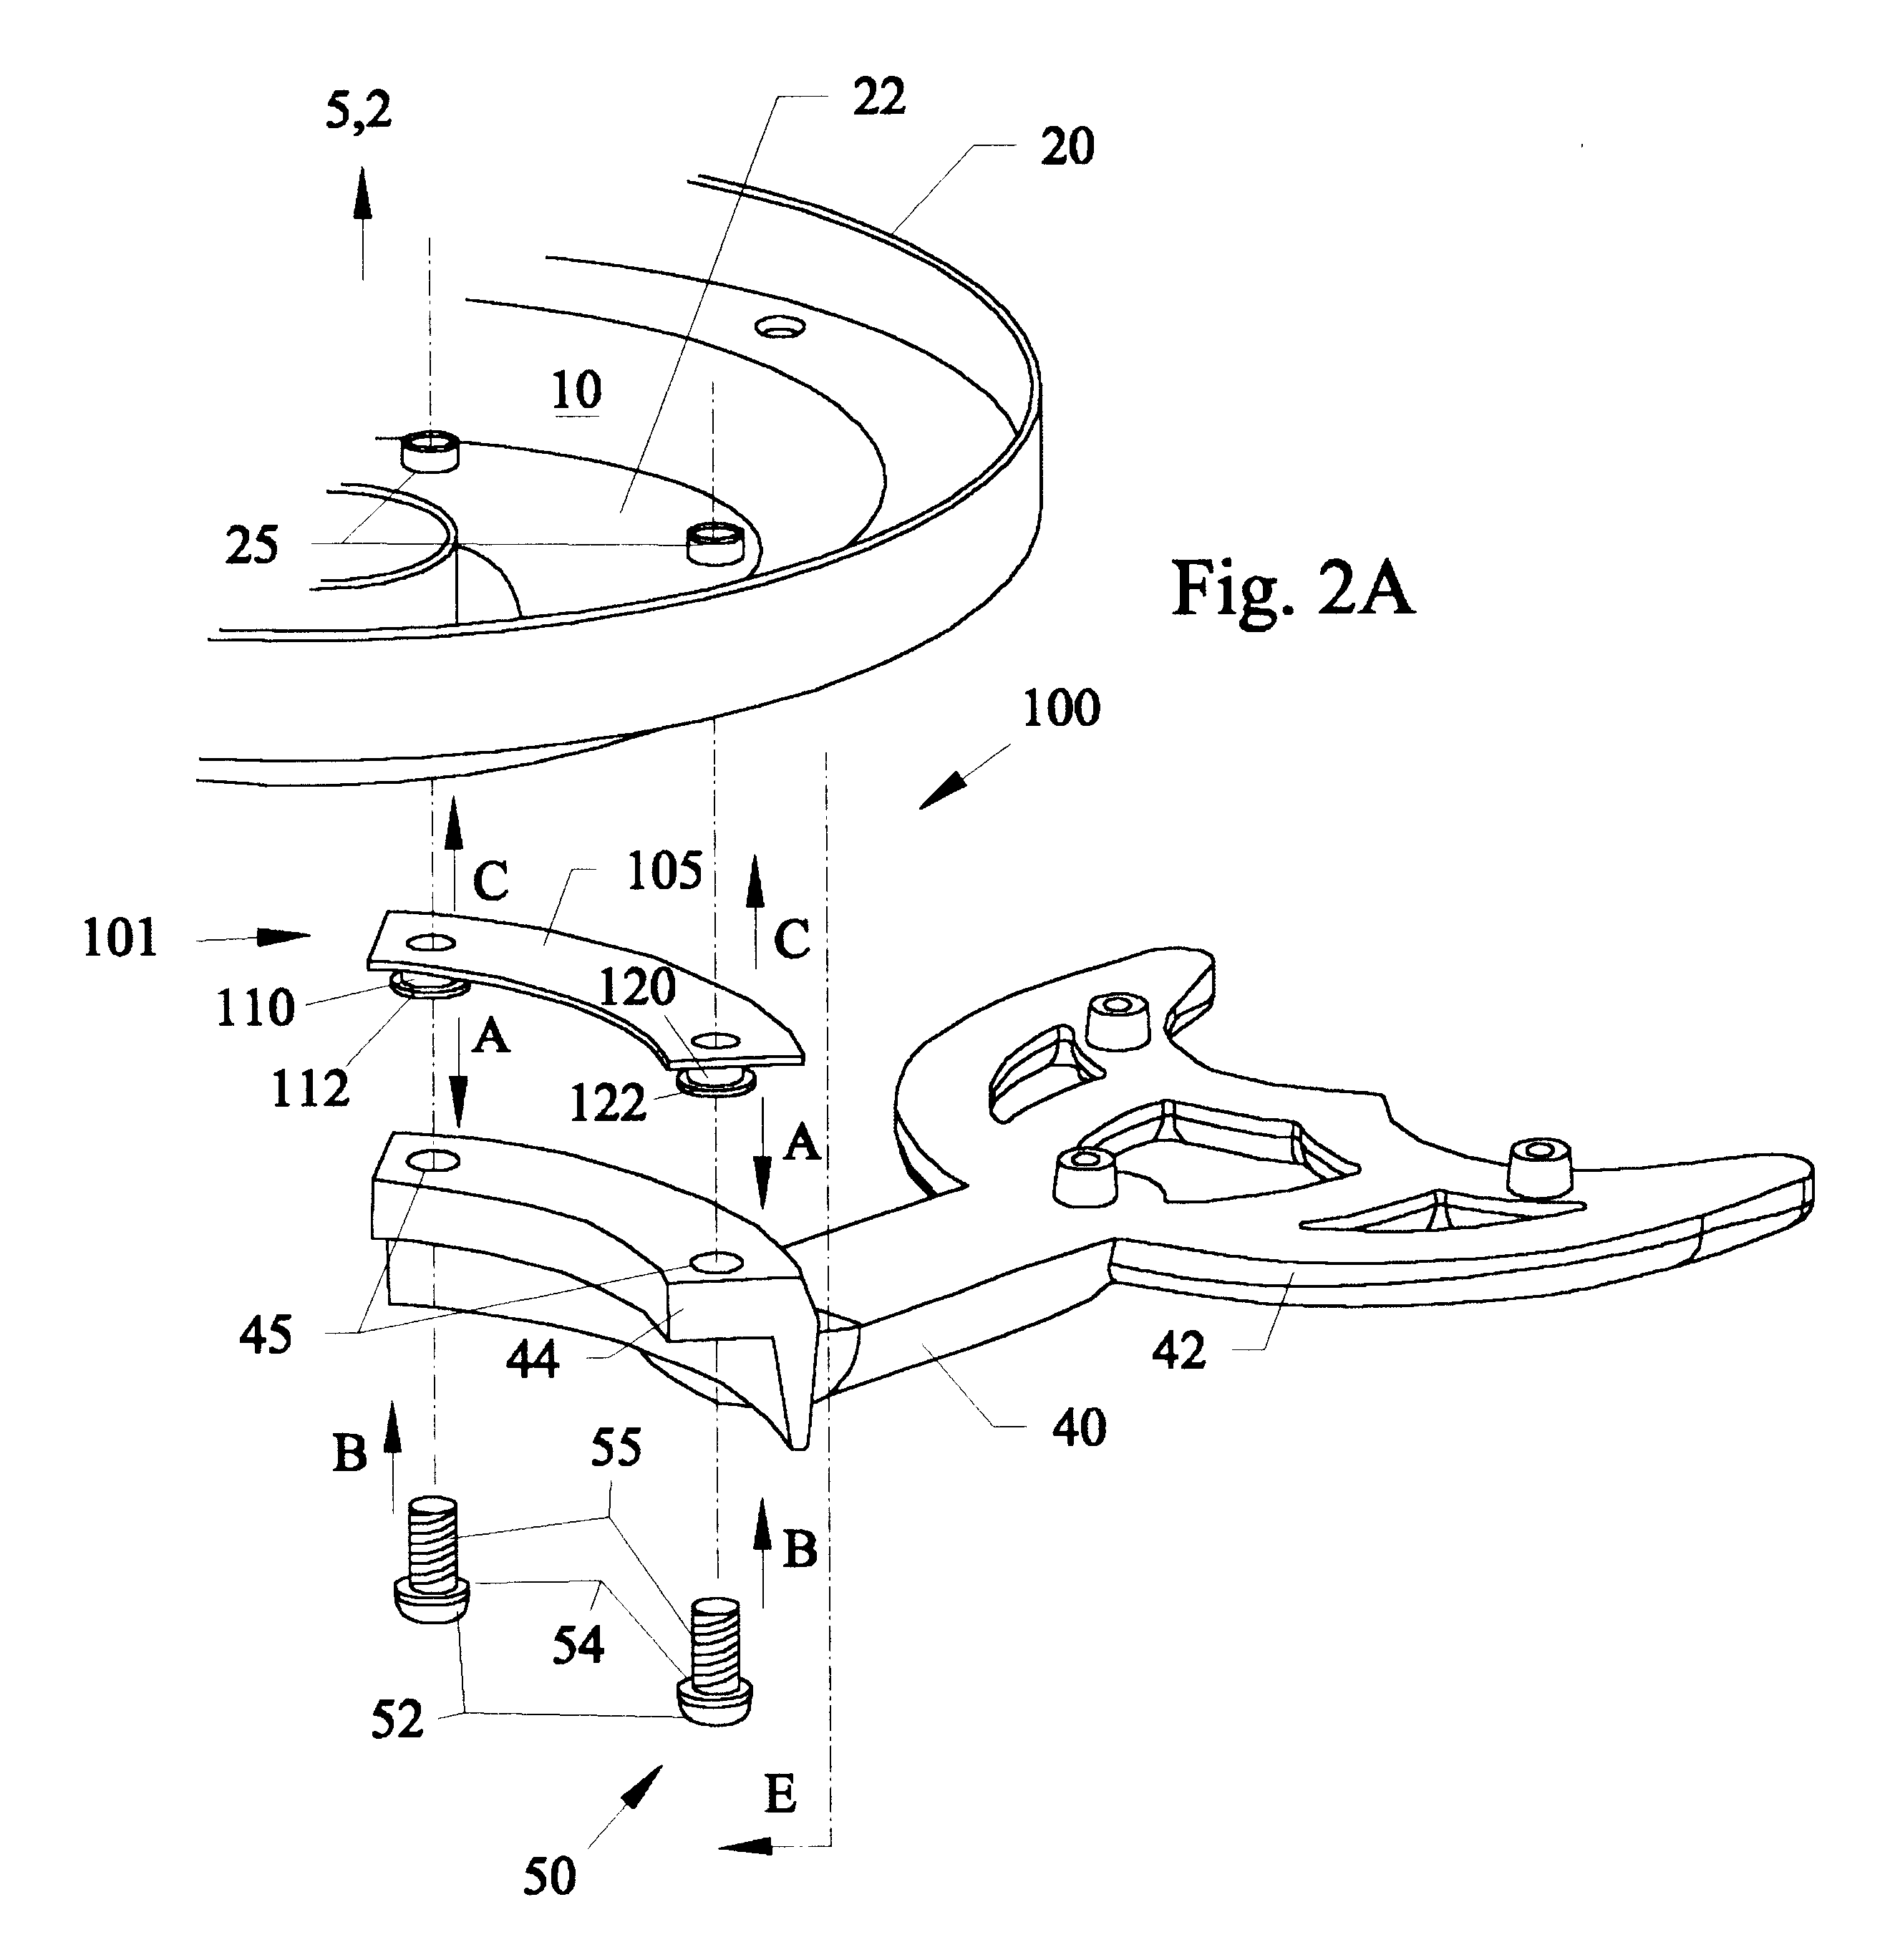 Device for connecting a fan blade to a rotor of a ceiling fan motor